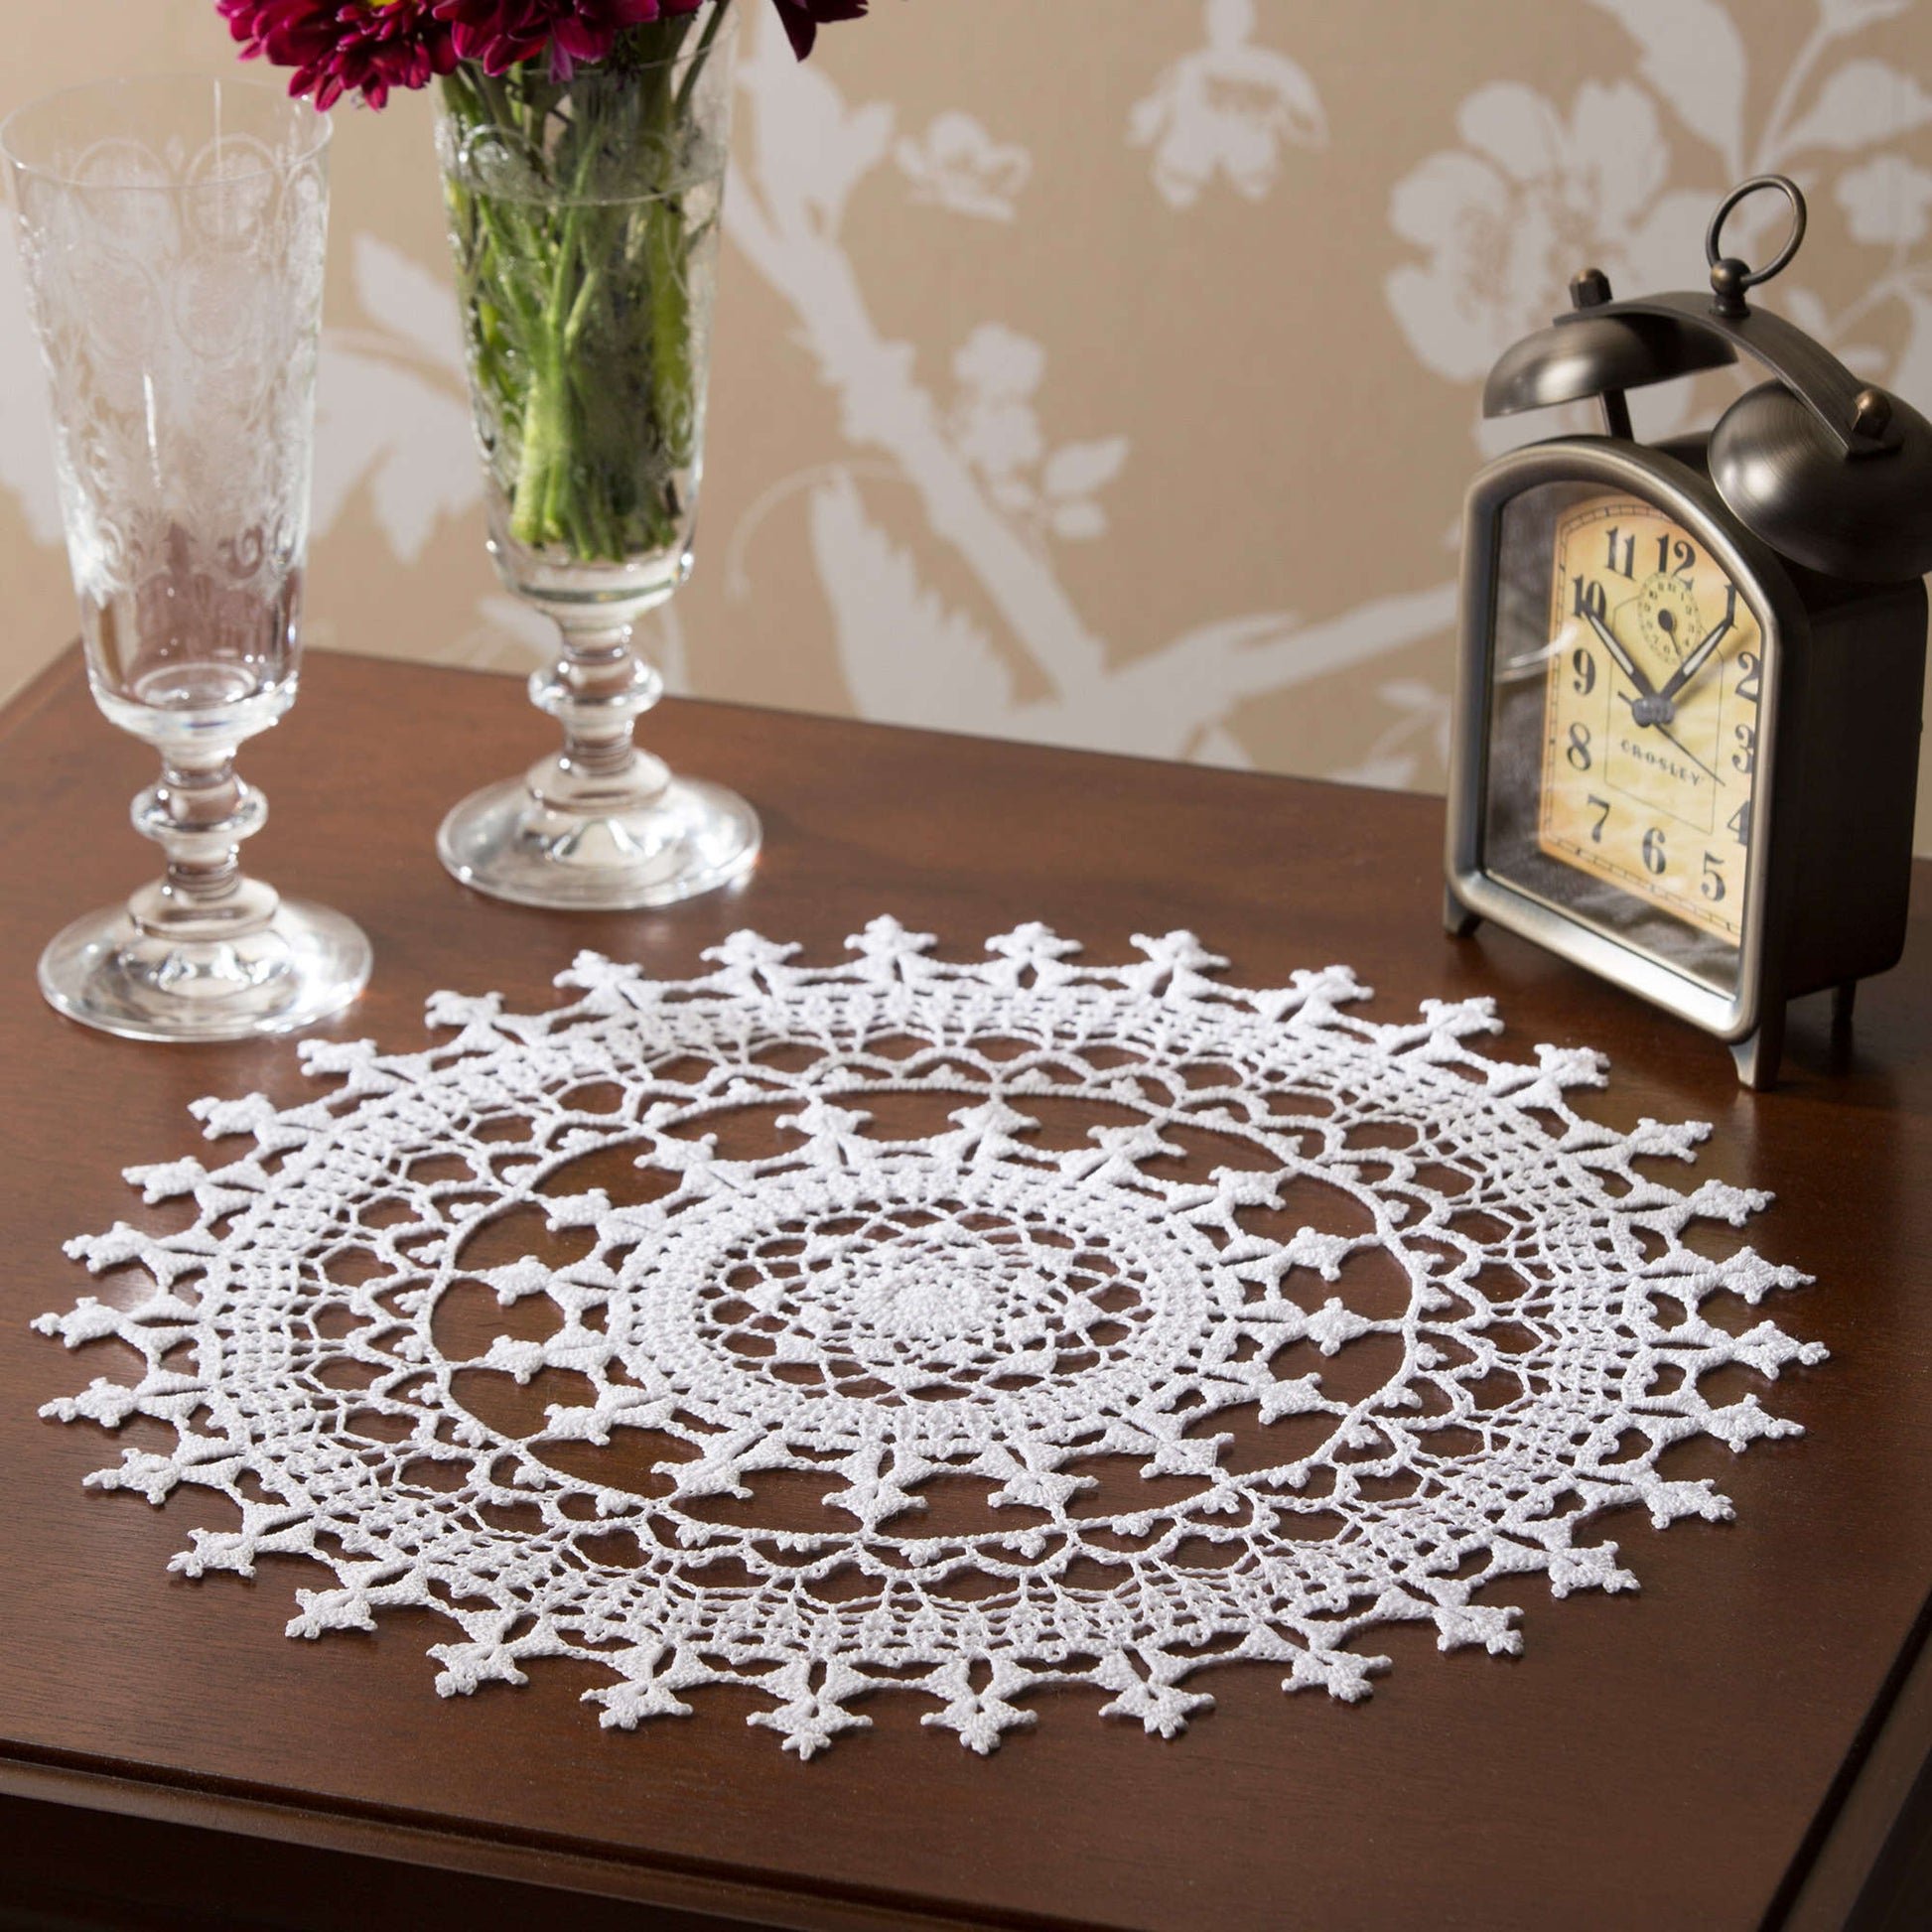 Aunt Lydia's Affinity Doily Crochet Kitchen Décor made in Aunt Lydia's Classic Crochet Thread yarn